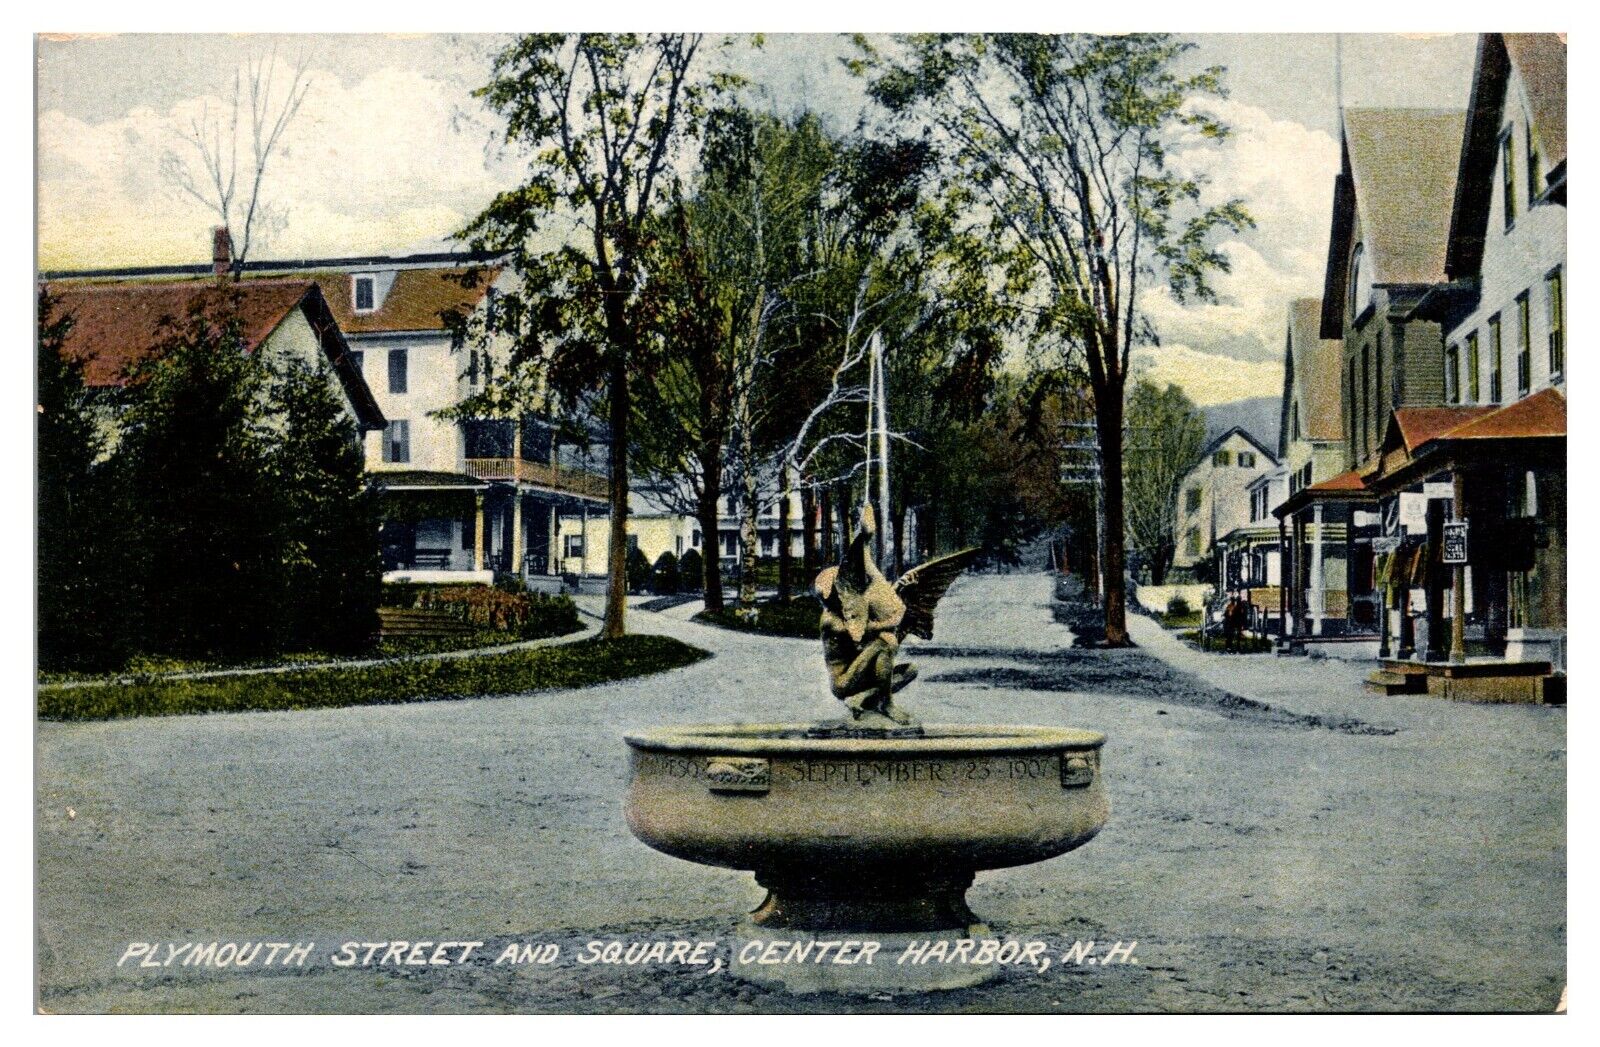 ANTQ Plymouth Street and Square, Street Scene, Fountain, Center Harbor, NH